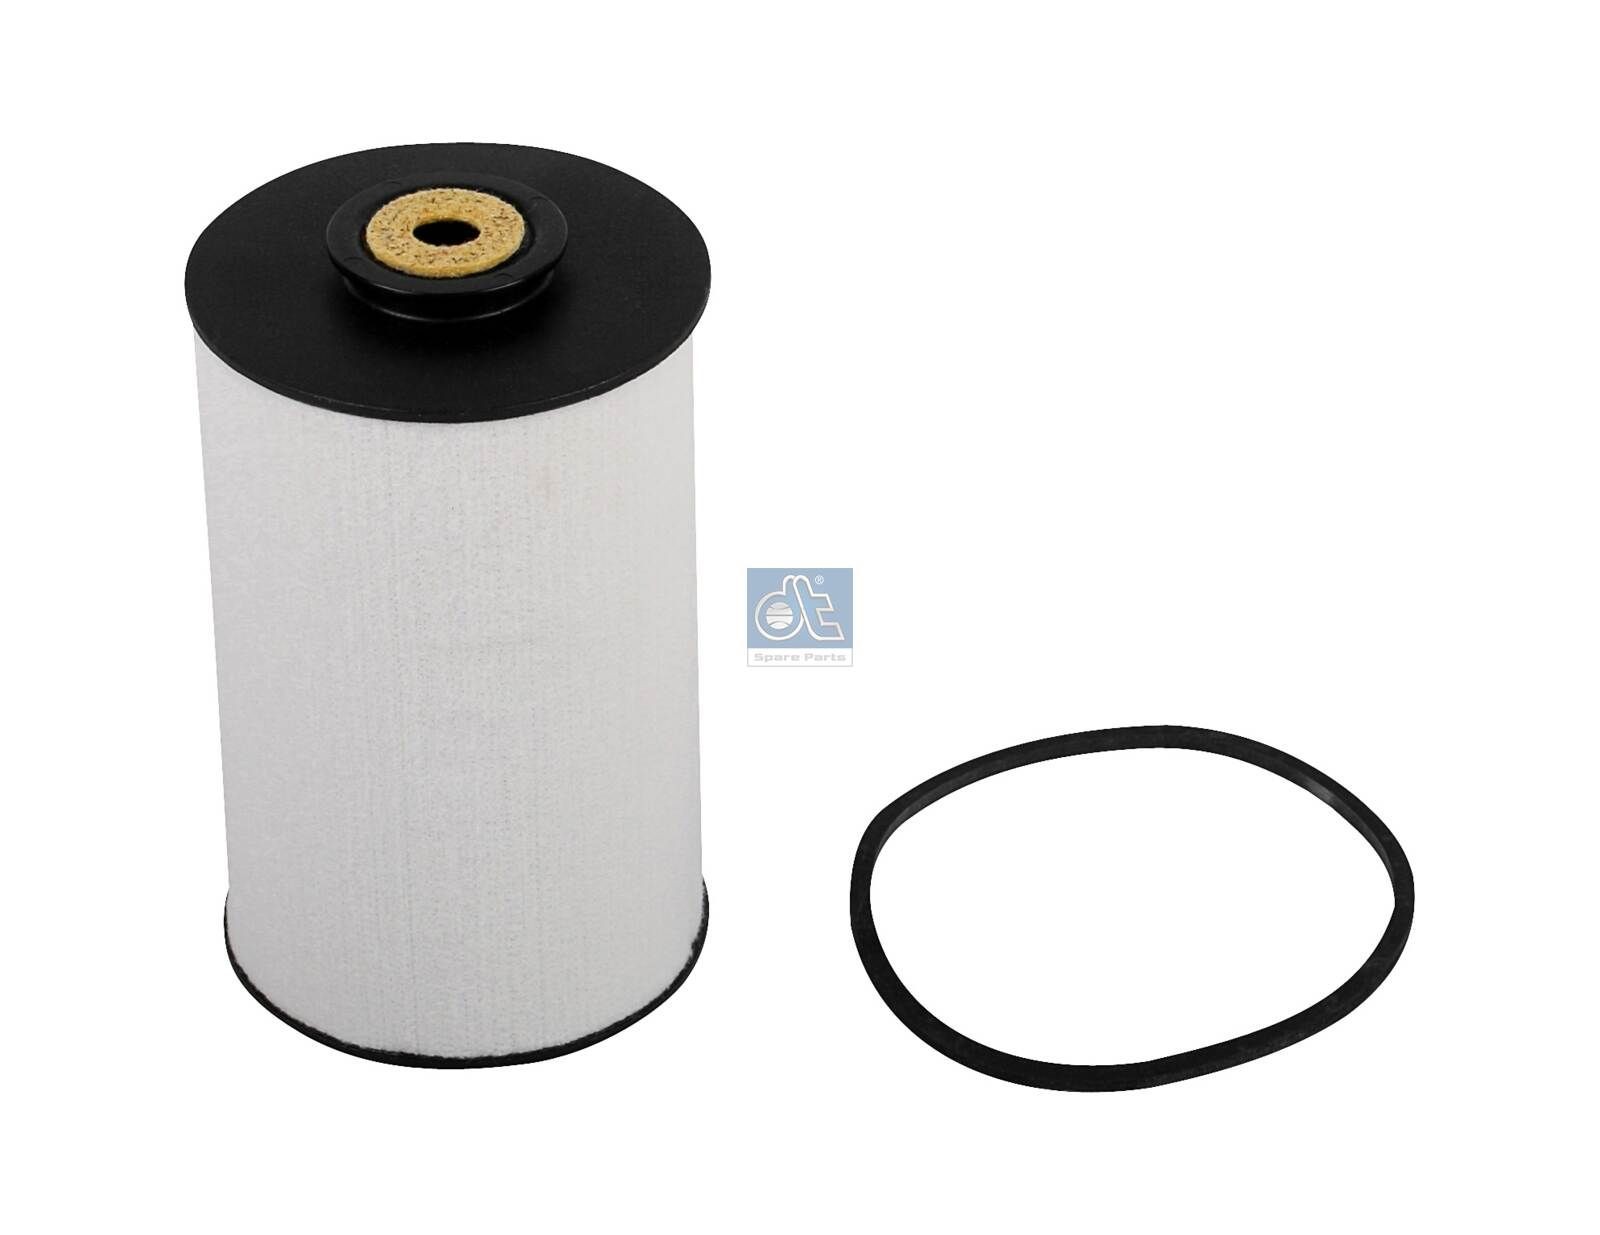 BFU 900 x DT Spare Parts 4.61531 Fuel filter A422 090 0051 67